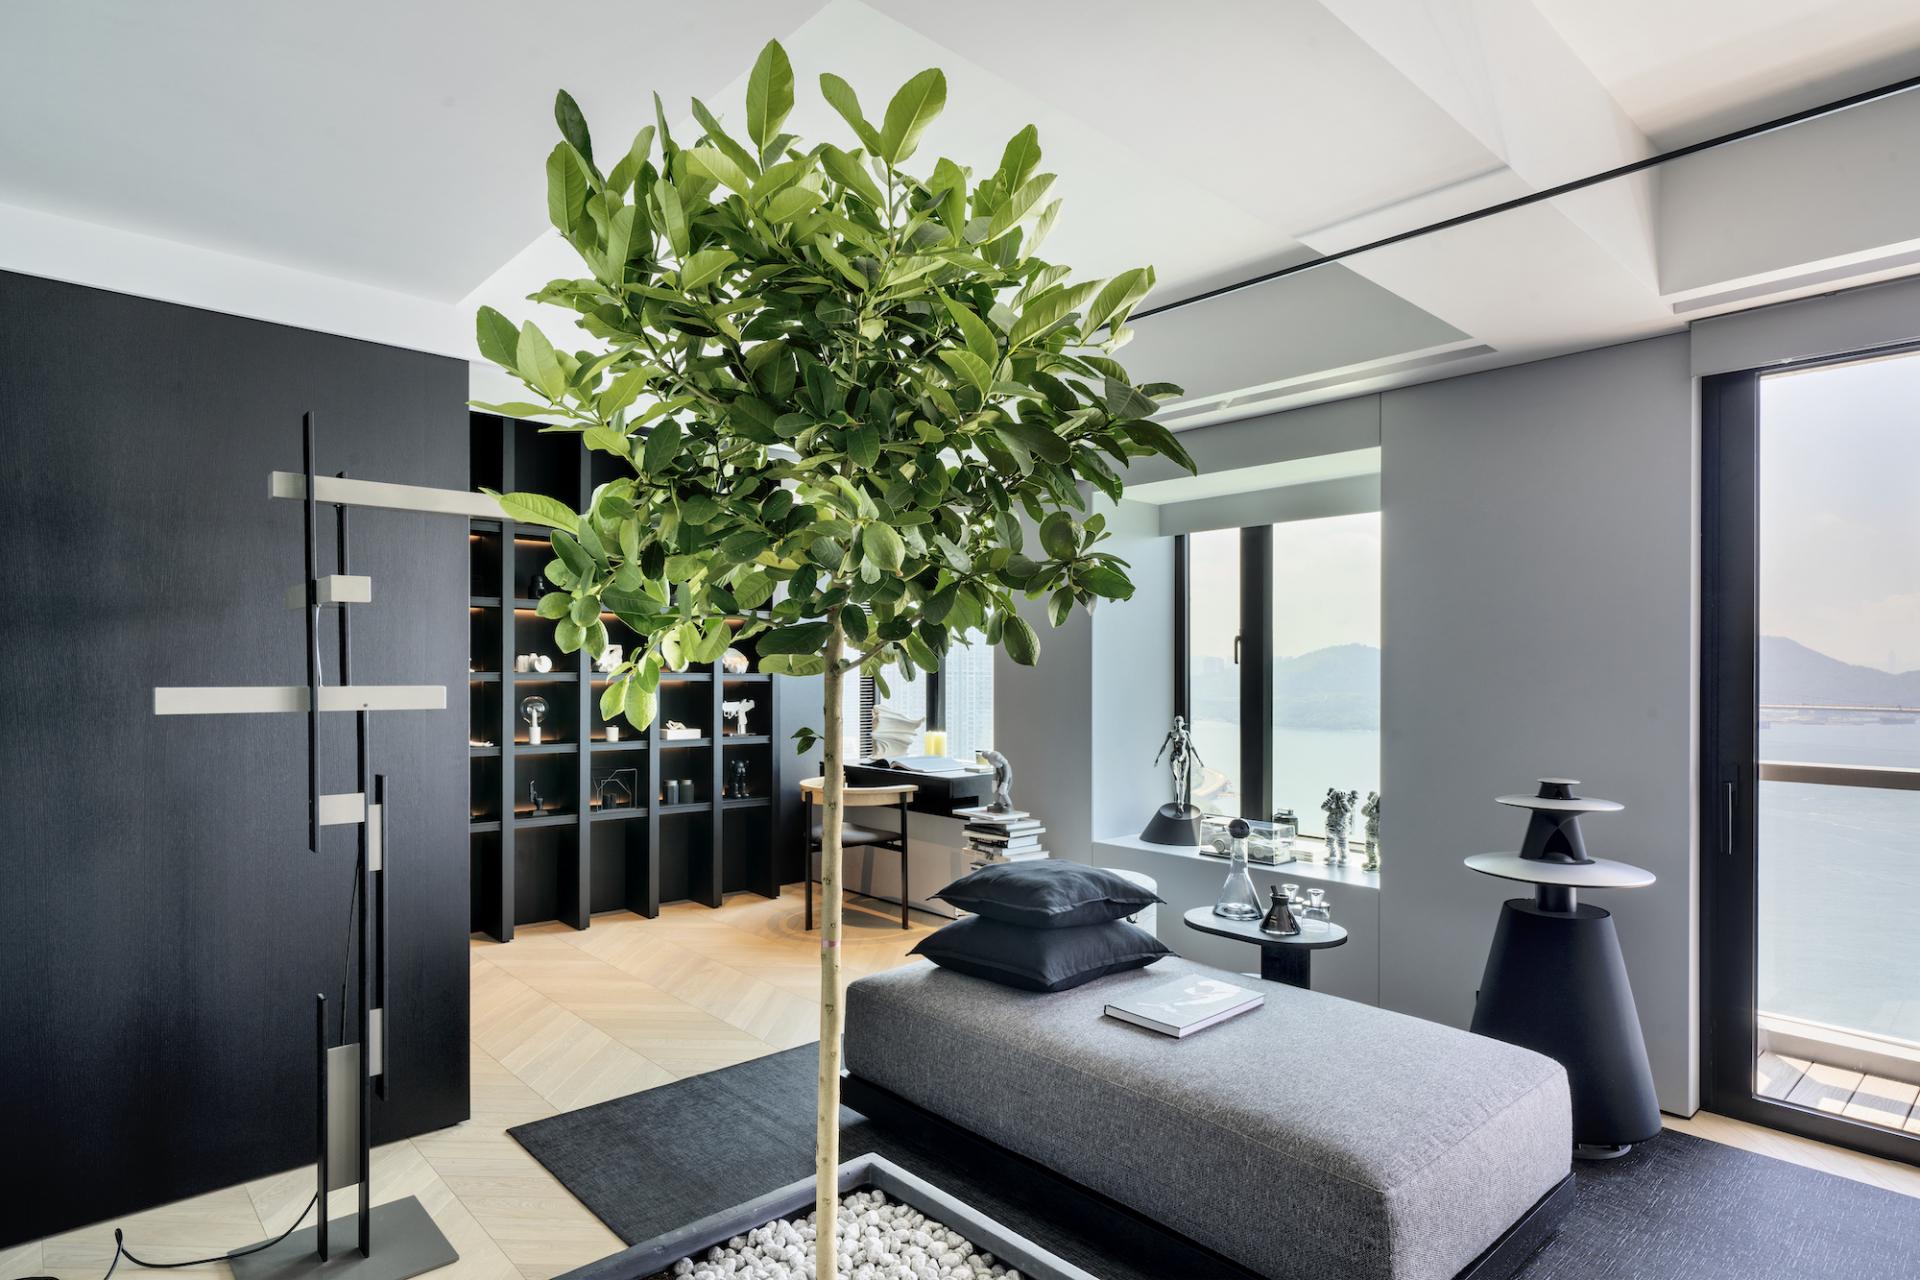 This Black and White Duplex is a Masterclass in Mono Interiors